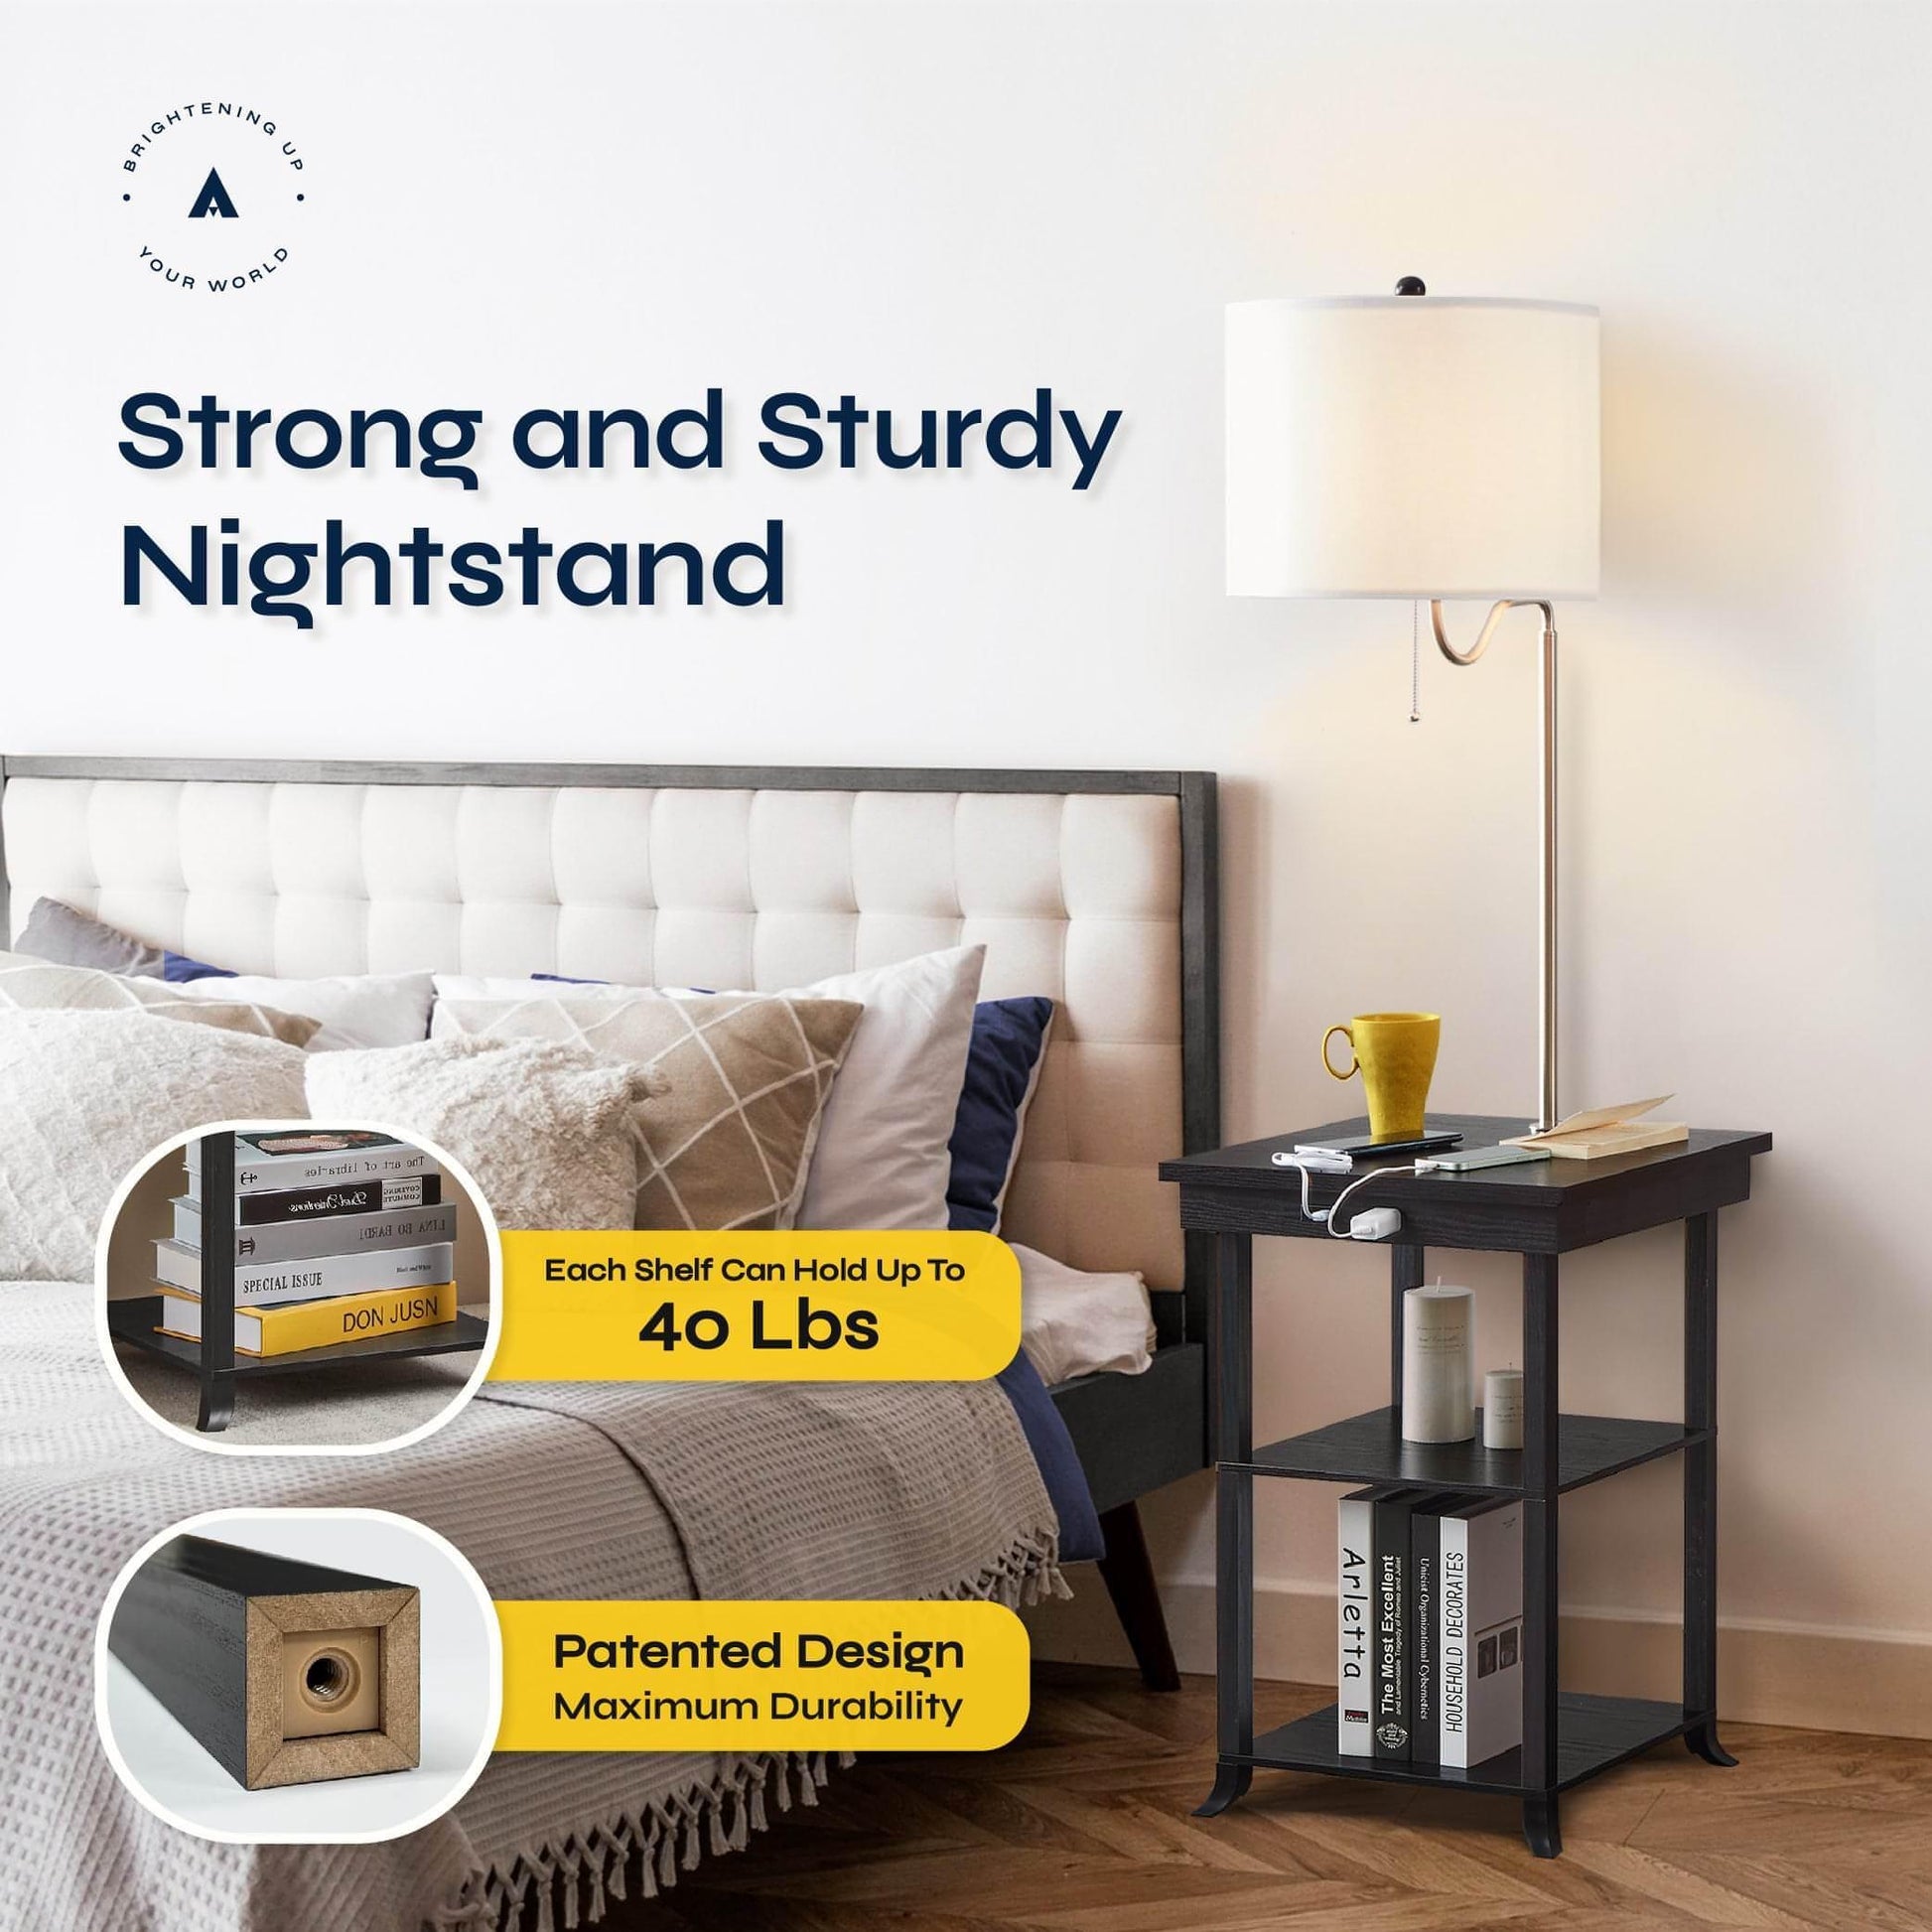 ATAMIN Ava Bedside Table with Lamp and USB-C Charging Station